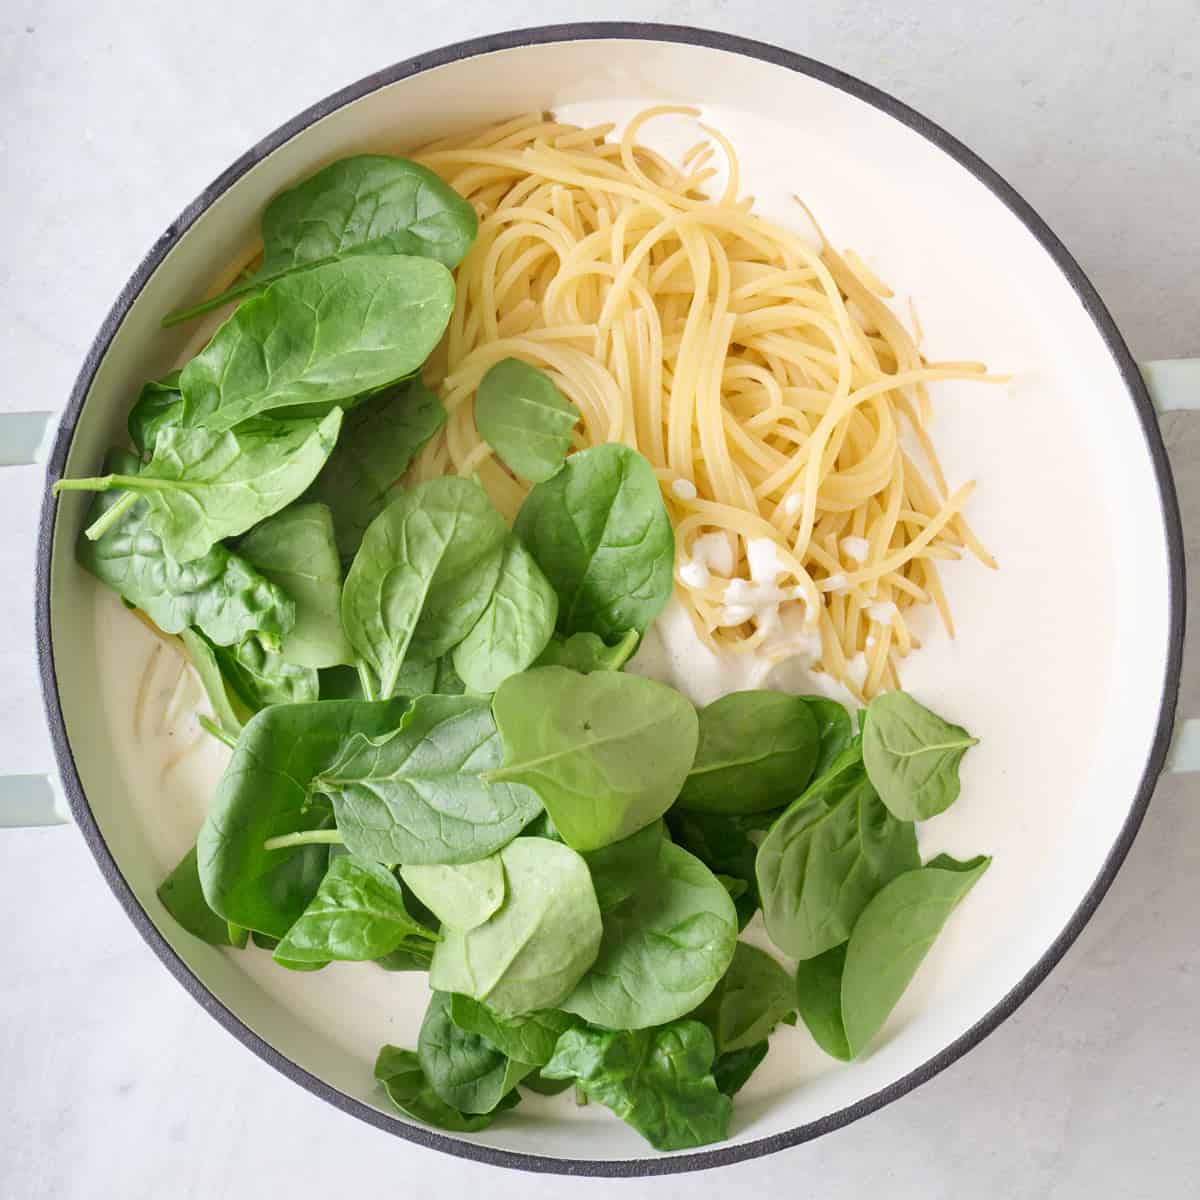 Cooked spaghetti, lemon ricotta pasta sauce, and baby spinach in a pot.